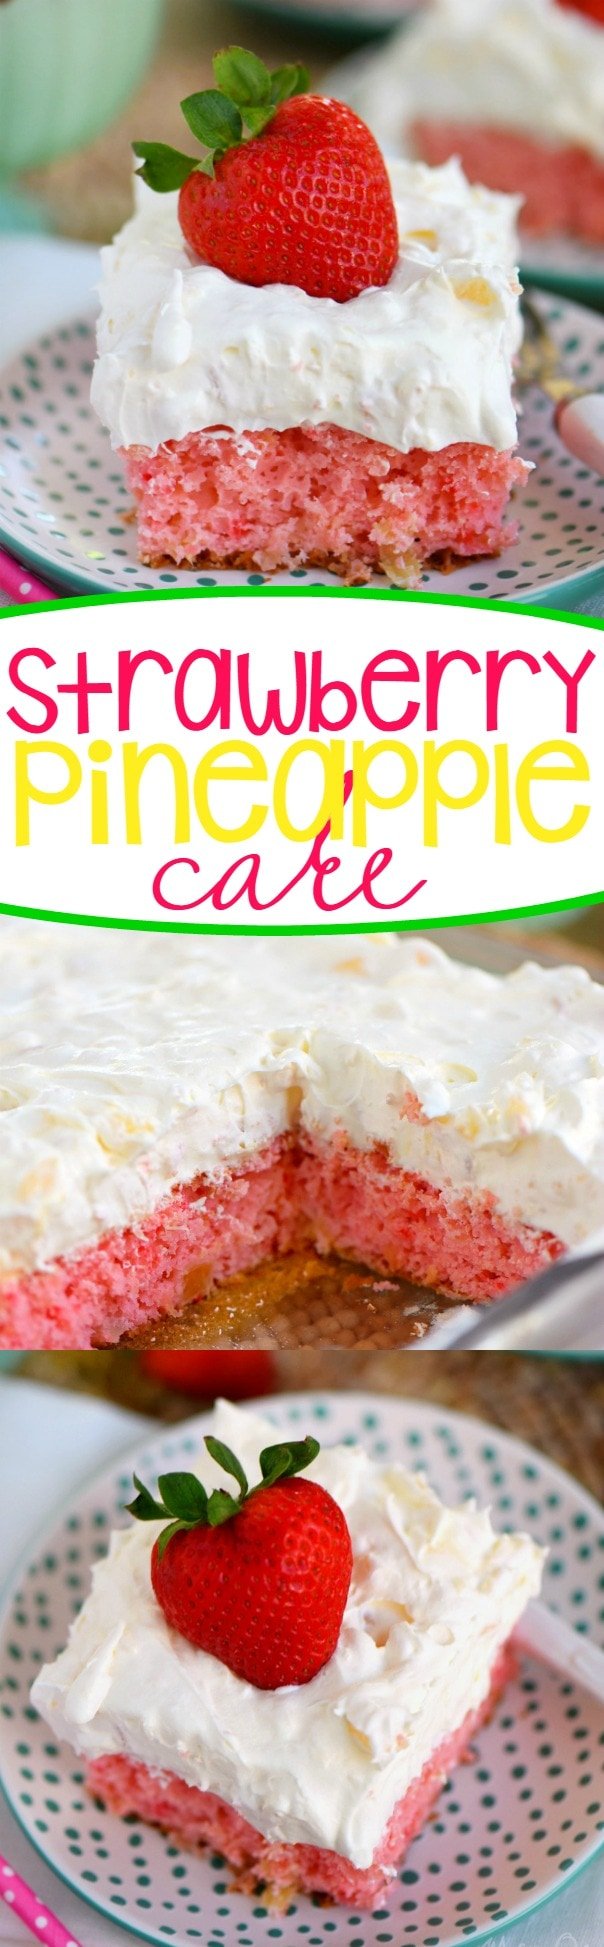 This Easy Strawberry Pineapple Cake recipe is ideal for all Spring and Summer festivities! Delightfully easy to make and topped with the creamiest pineapple fluff frosting, this cake will quickly become your go-to dessert recipe! 